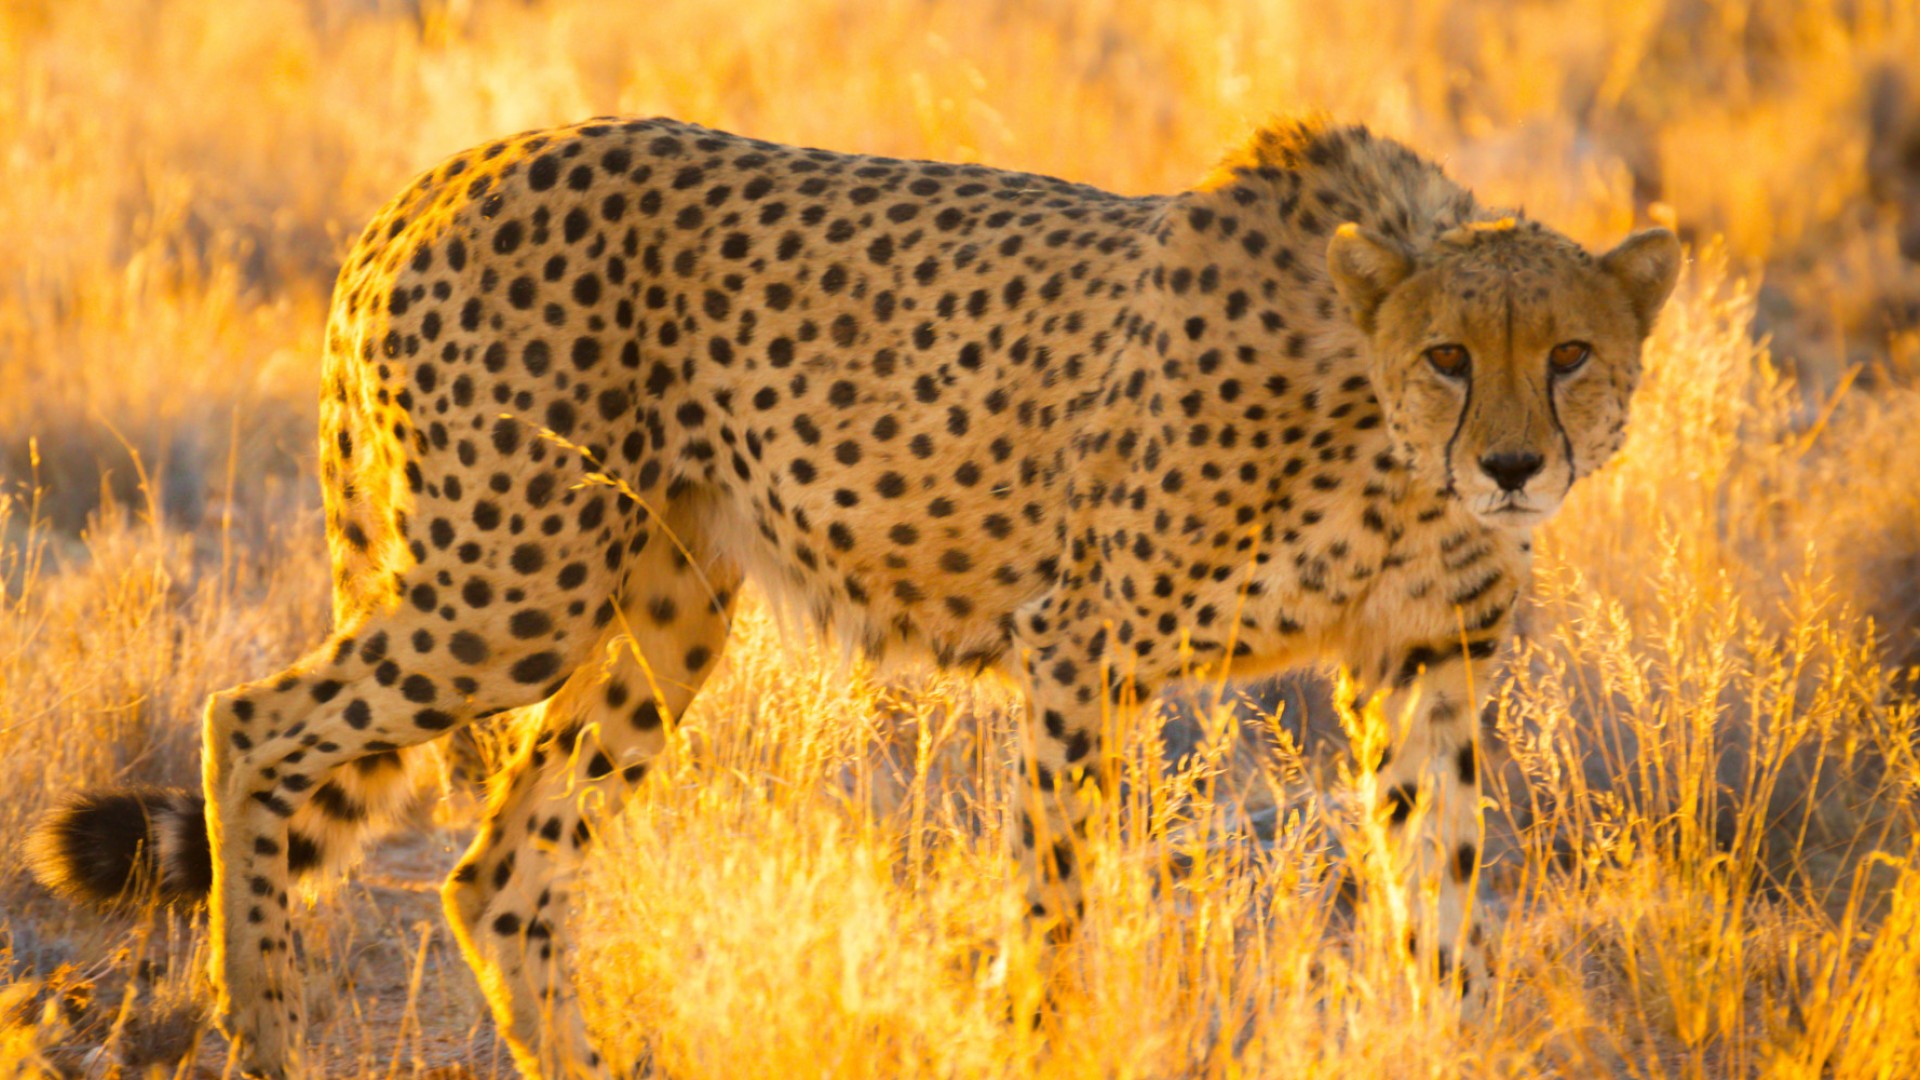 Cheetah in Namibia lurking through tall grass looking directly at the camera